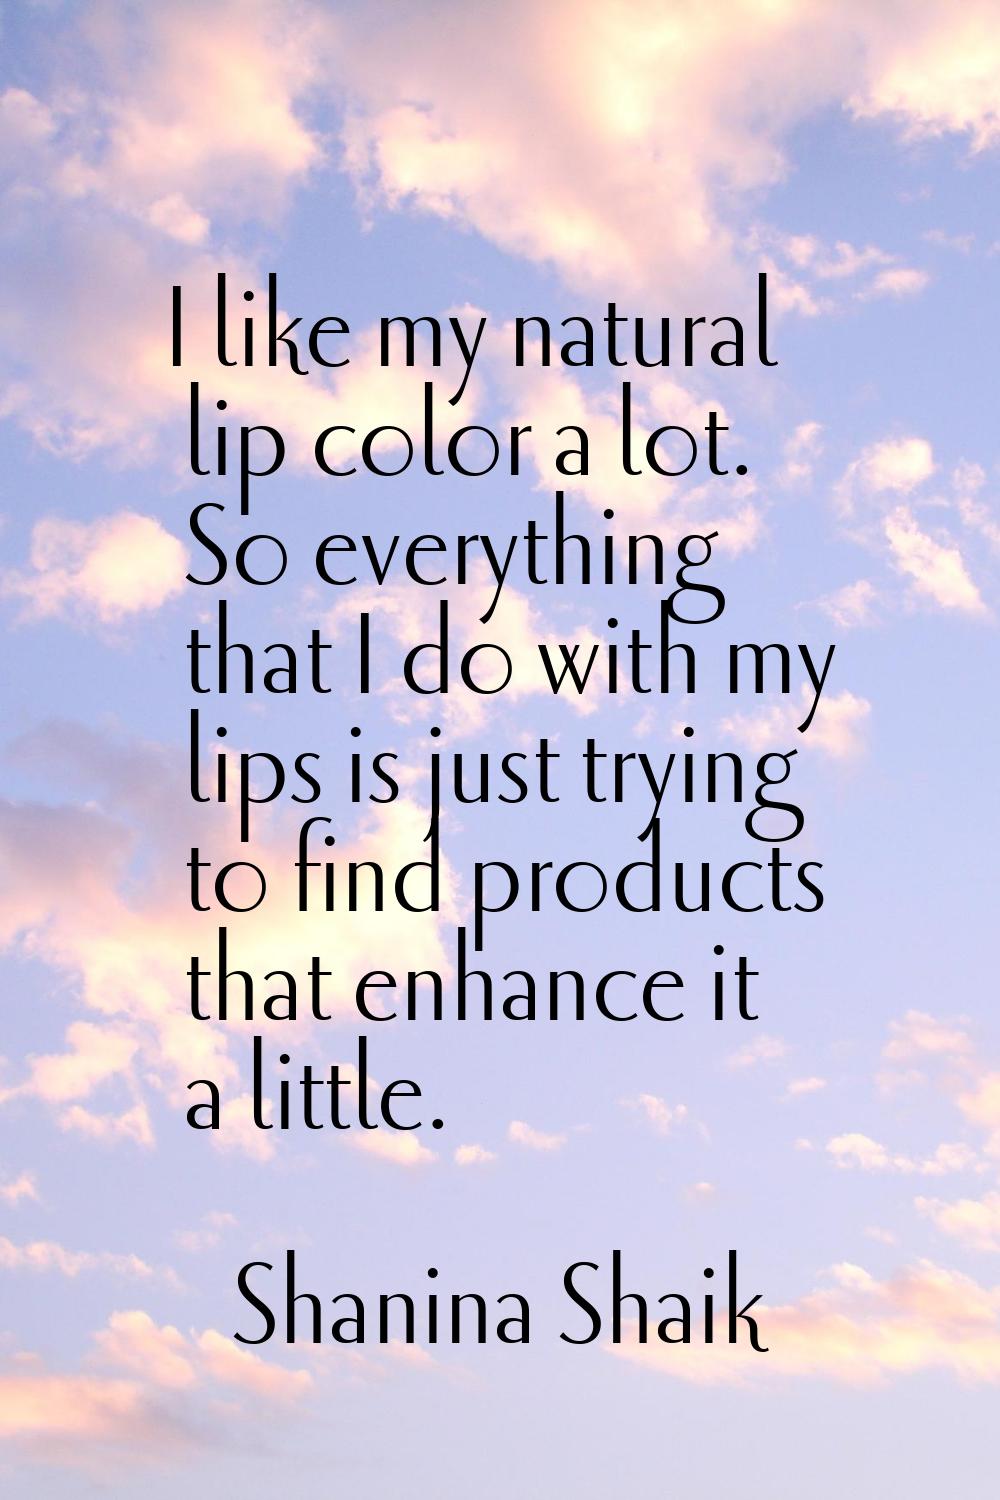 I like my natural lip color a lot. So everything that I do with my lips is just trying to find prod